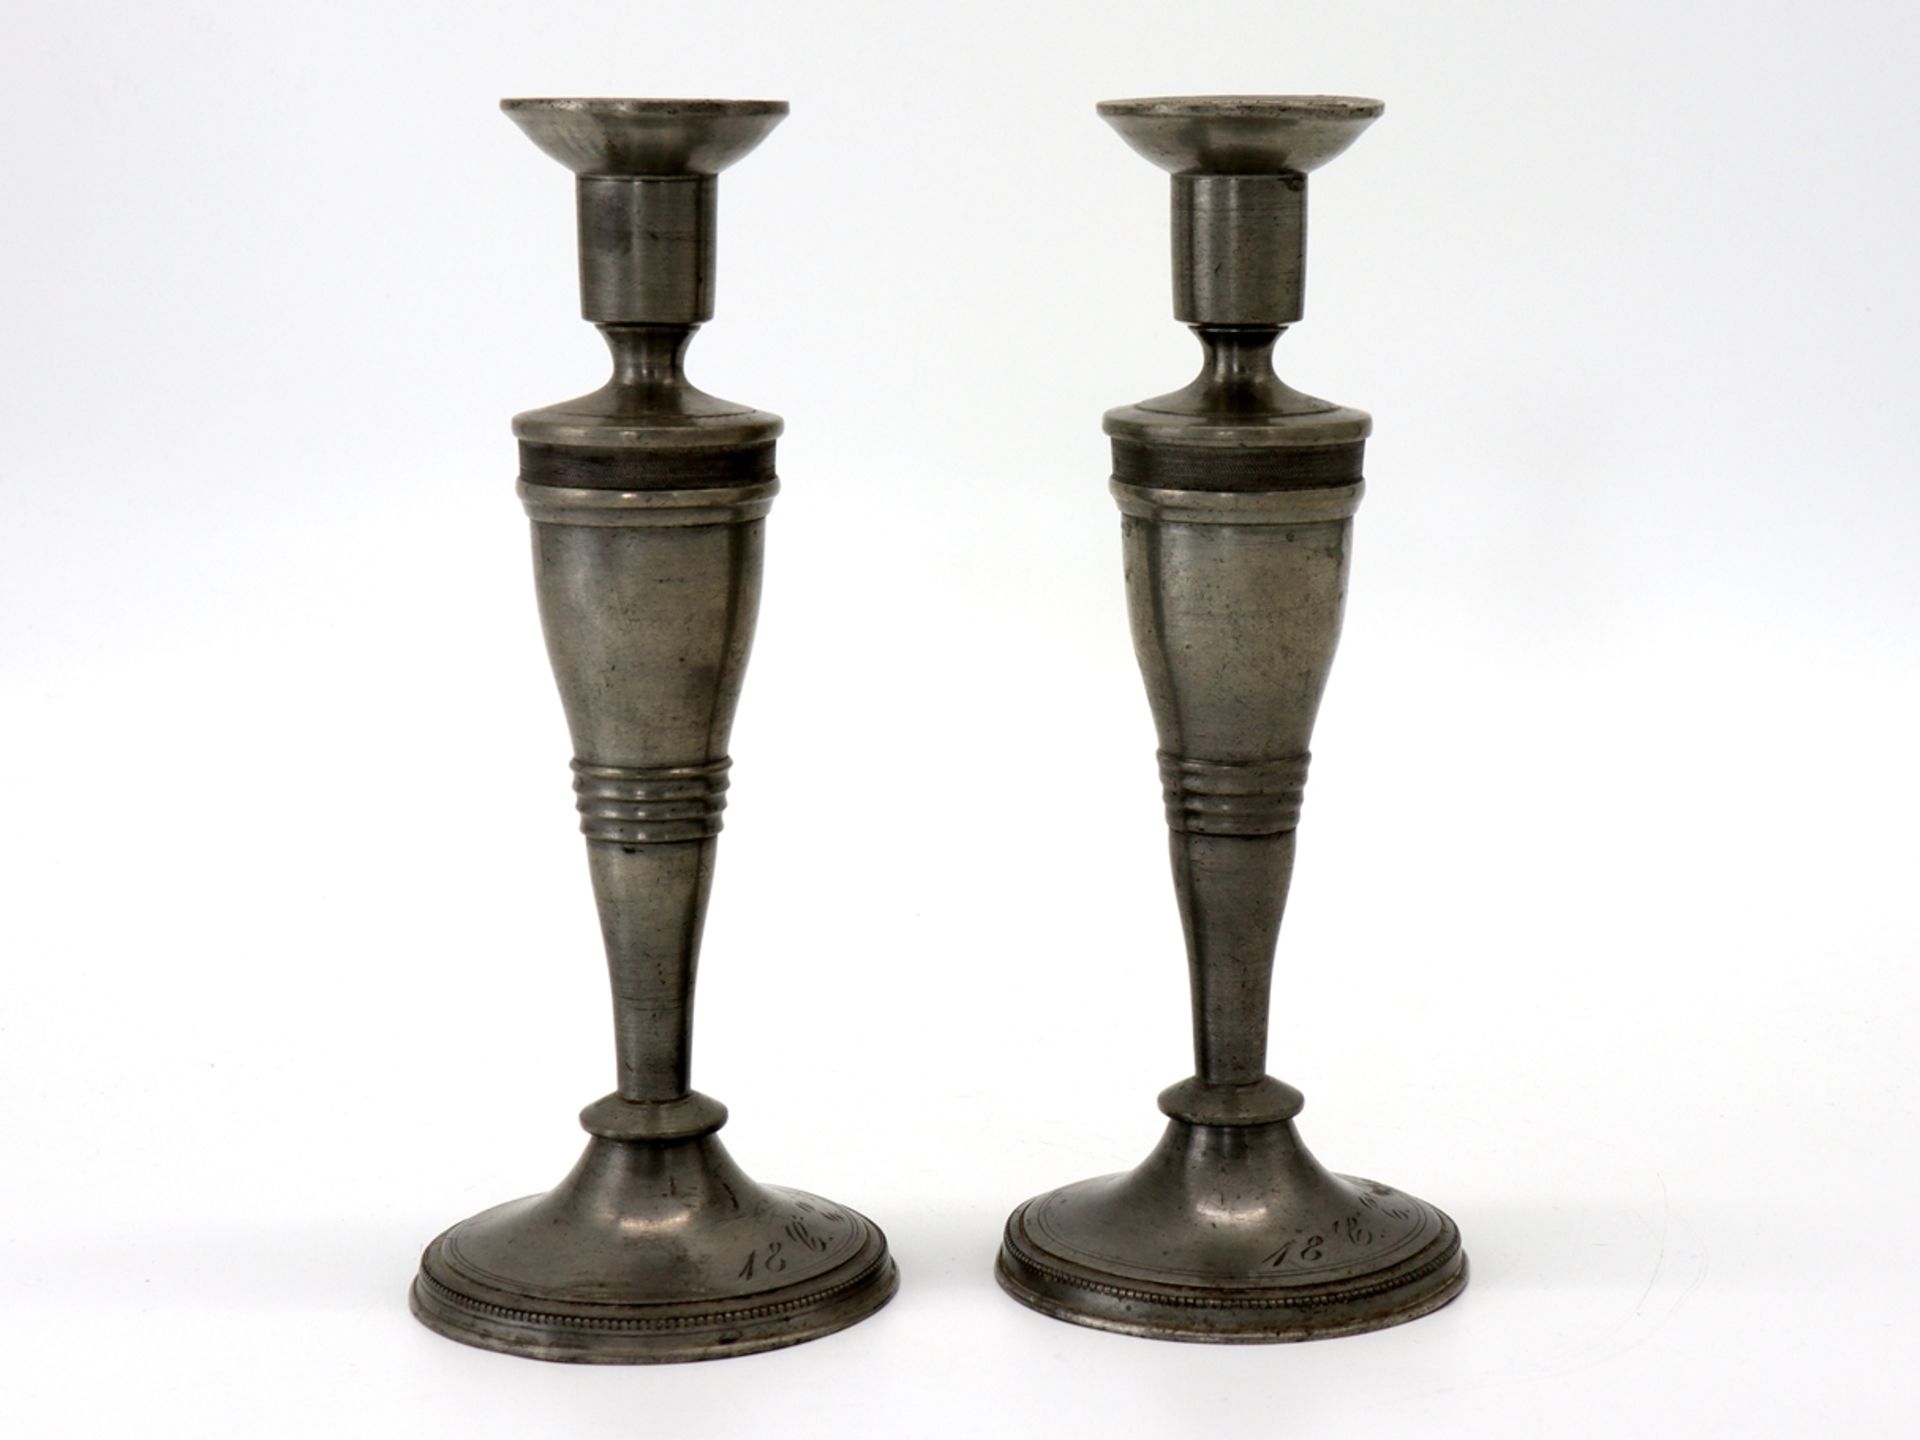 Pair of candlesticks pewter, dated 1886 - Image 3 of 6